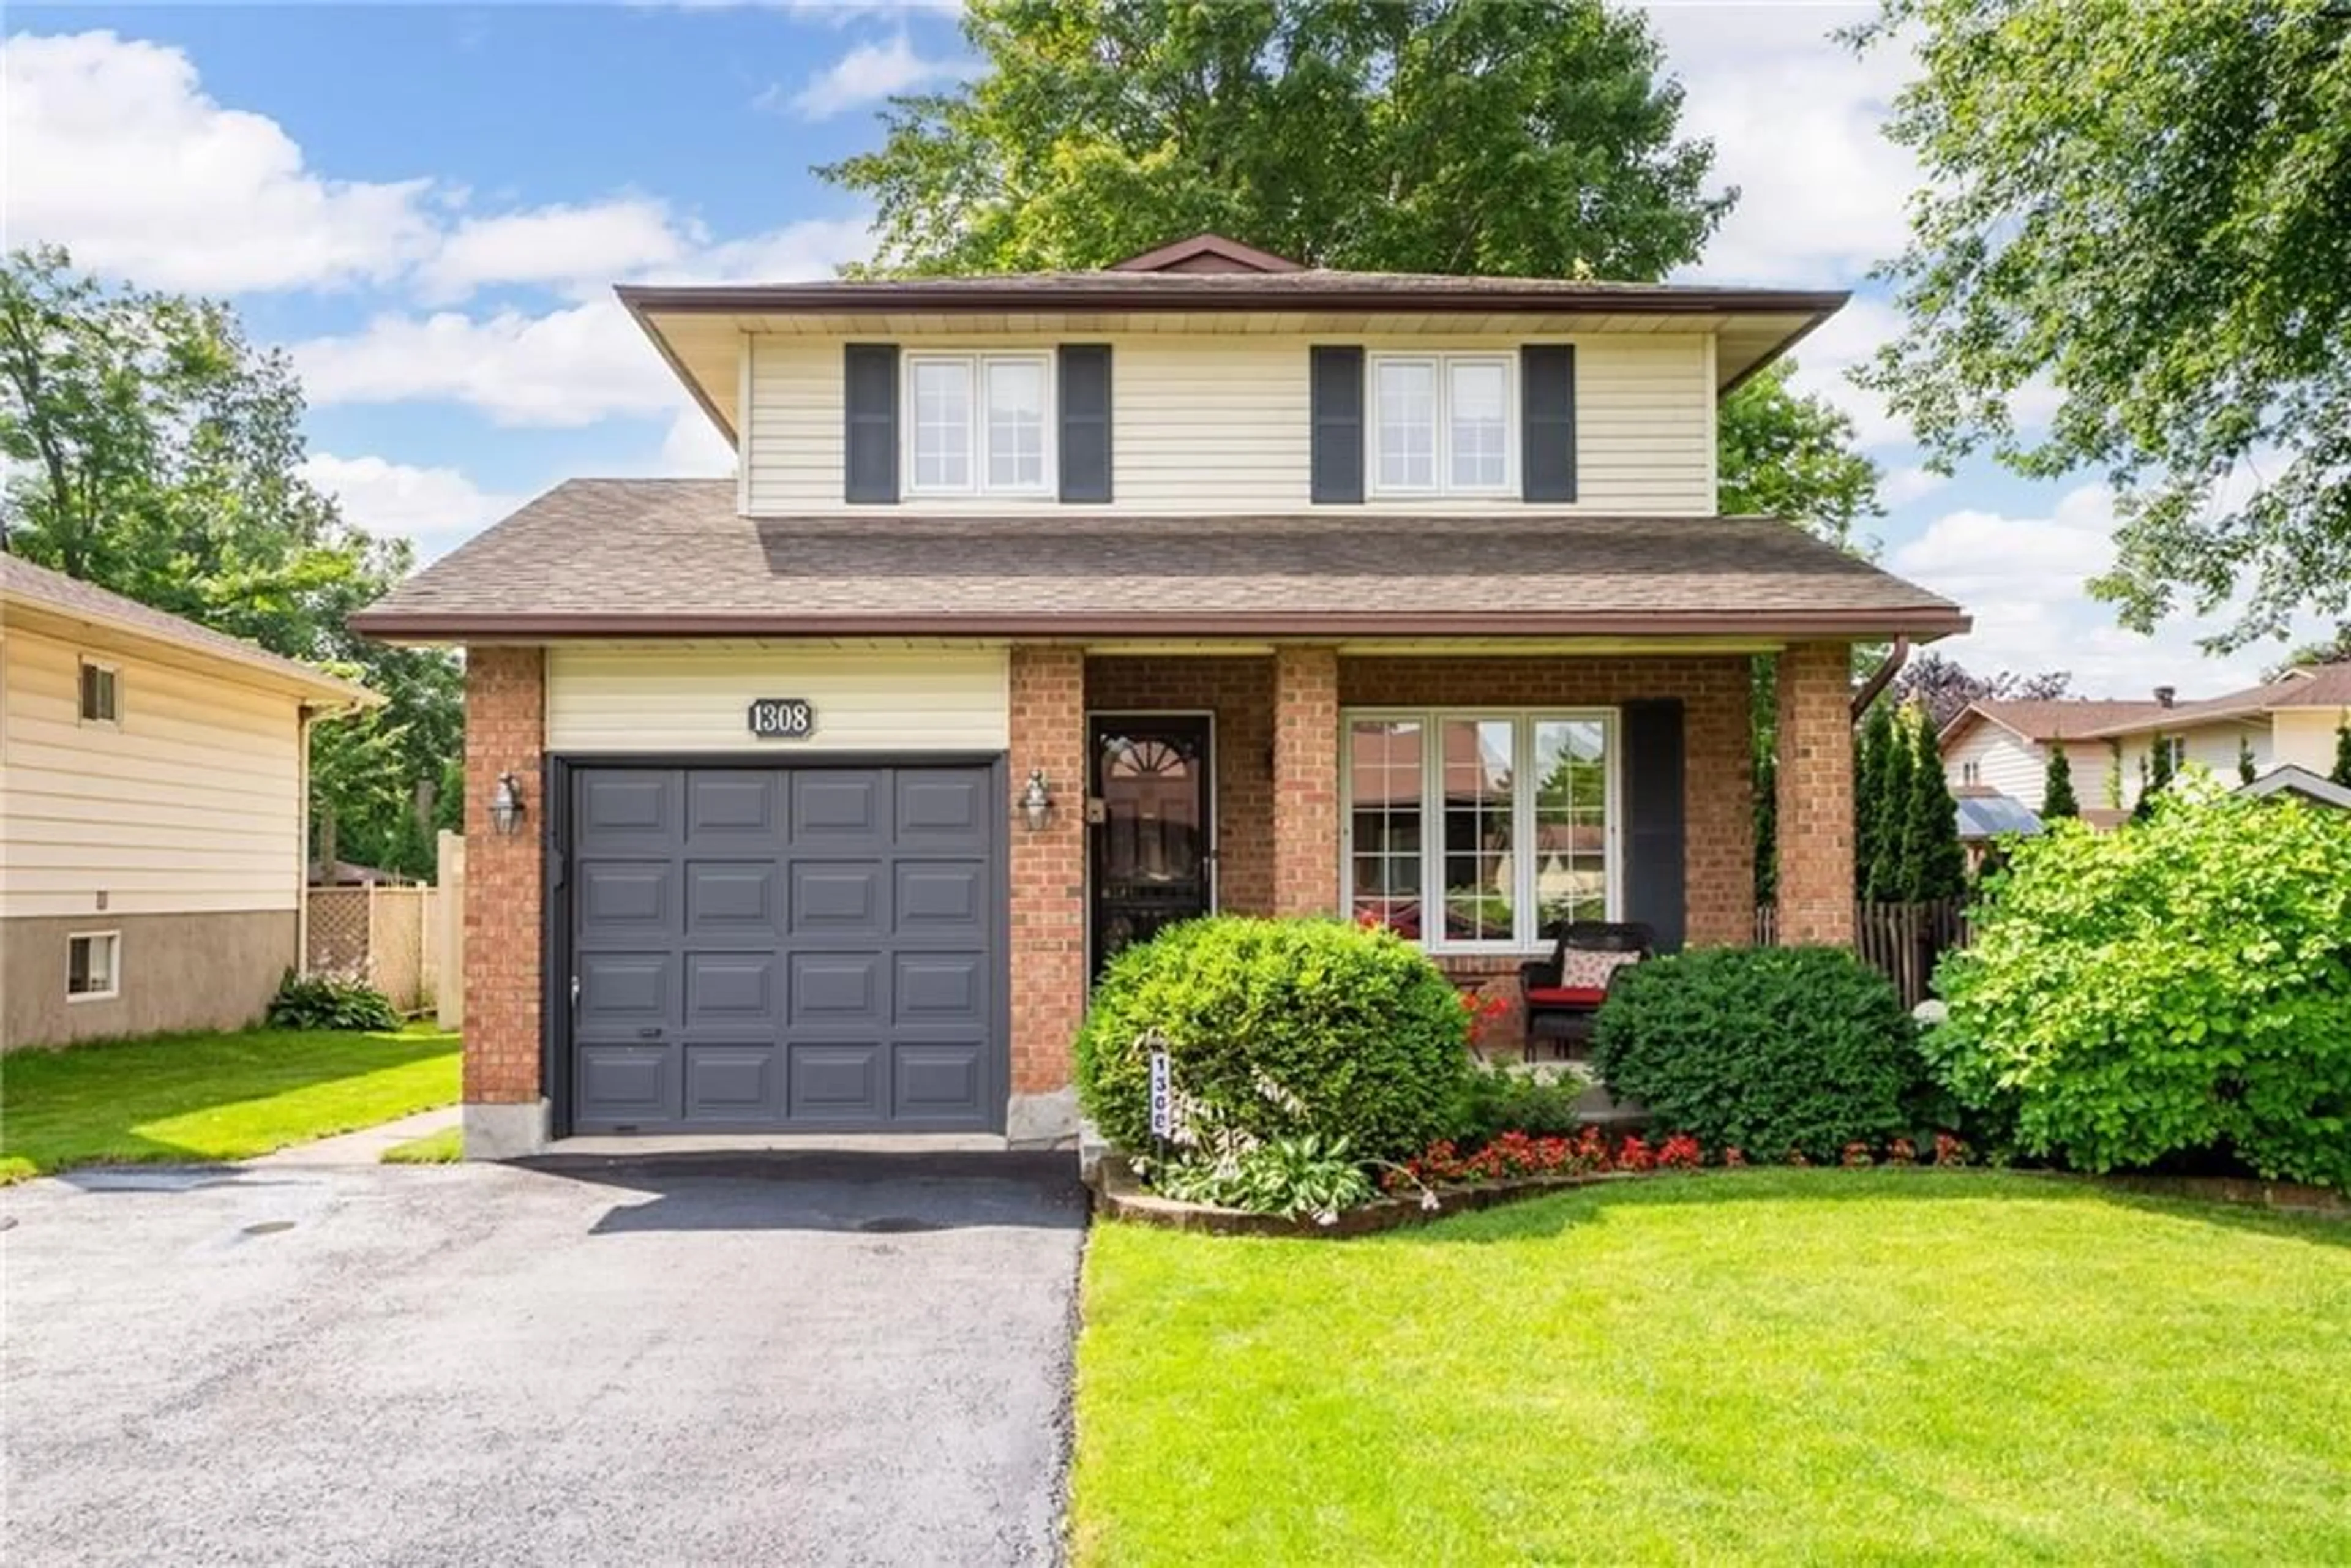 Home with brick exterior material for 1308 LANCASTER Cres, Cornwall Ontario K6H 6P6